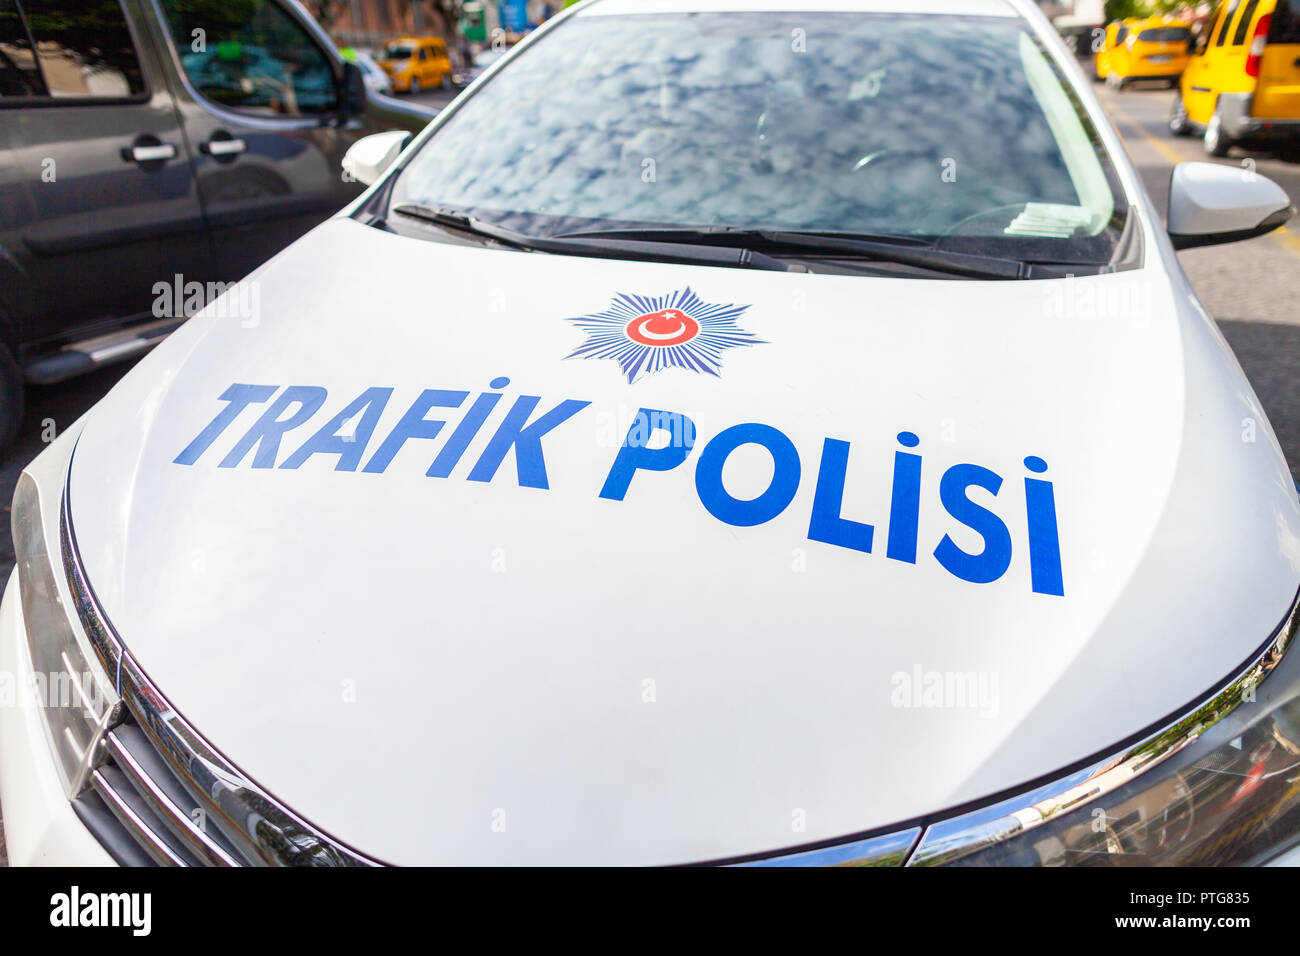 Police car from the turkish police Trafik Polisi stands on a street Stock Photo